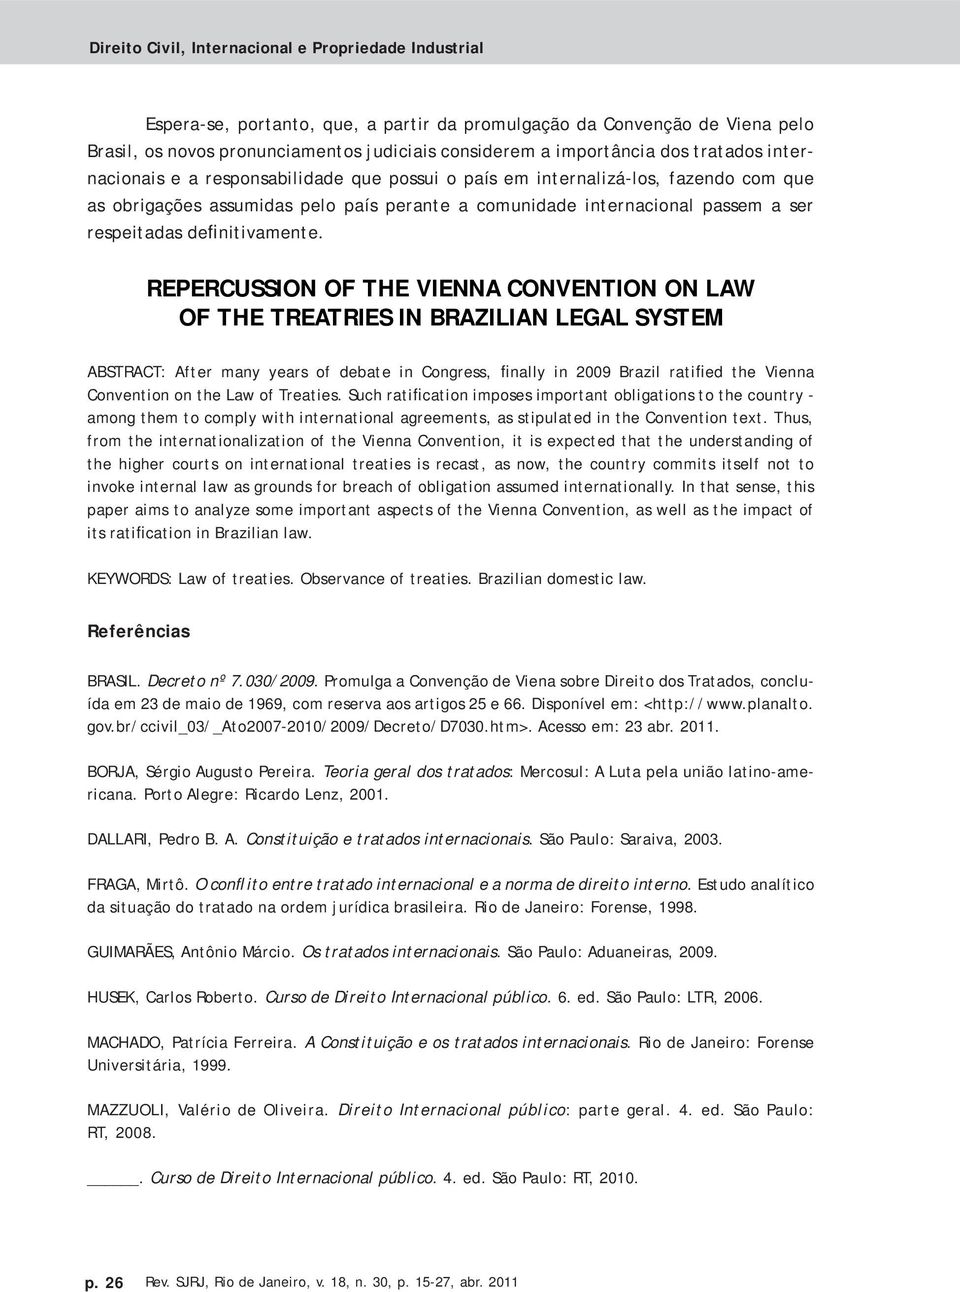 REPERCUSSION OF THE VIENNA CONVENTION ON LAW OF THE TREATRIES IN BRAZILIAN LEGAL SYSTEM ABSTRACT: After many years of debate in Congress, finally in 2009 Brazil ratified the Vienna Convention on the